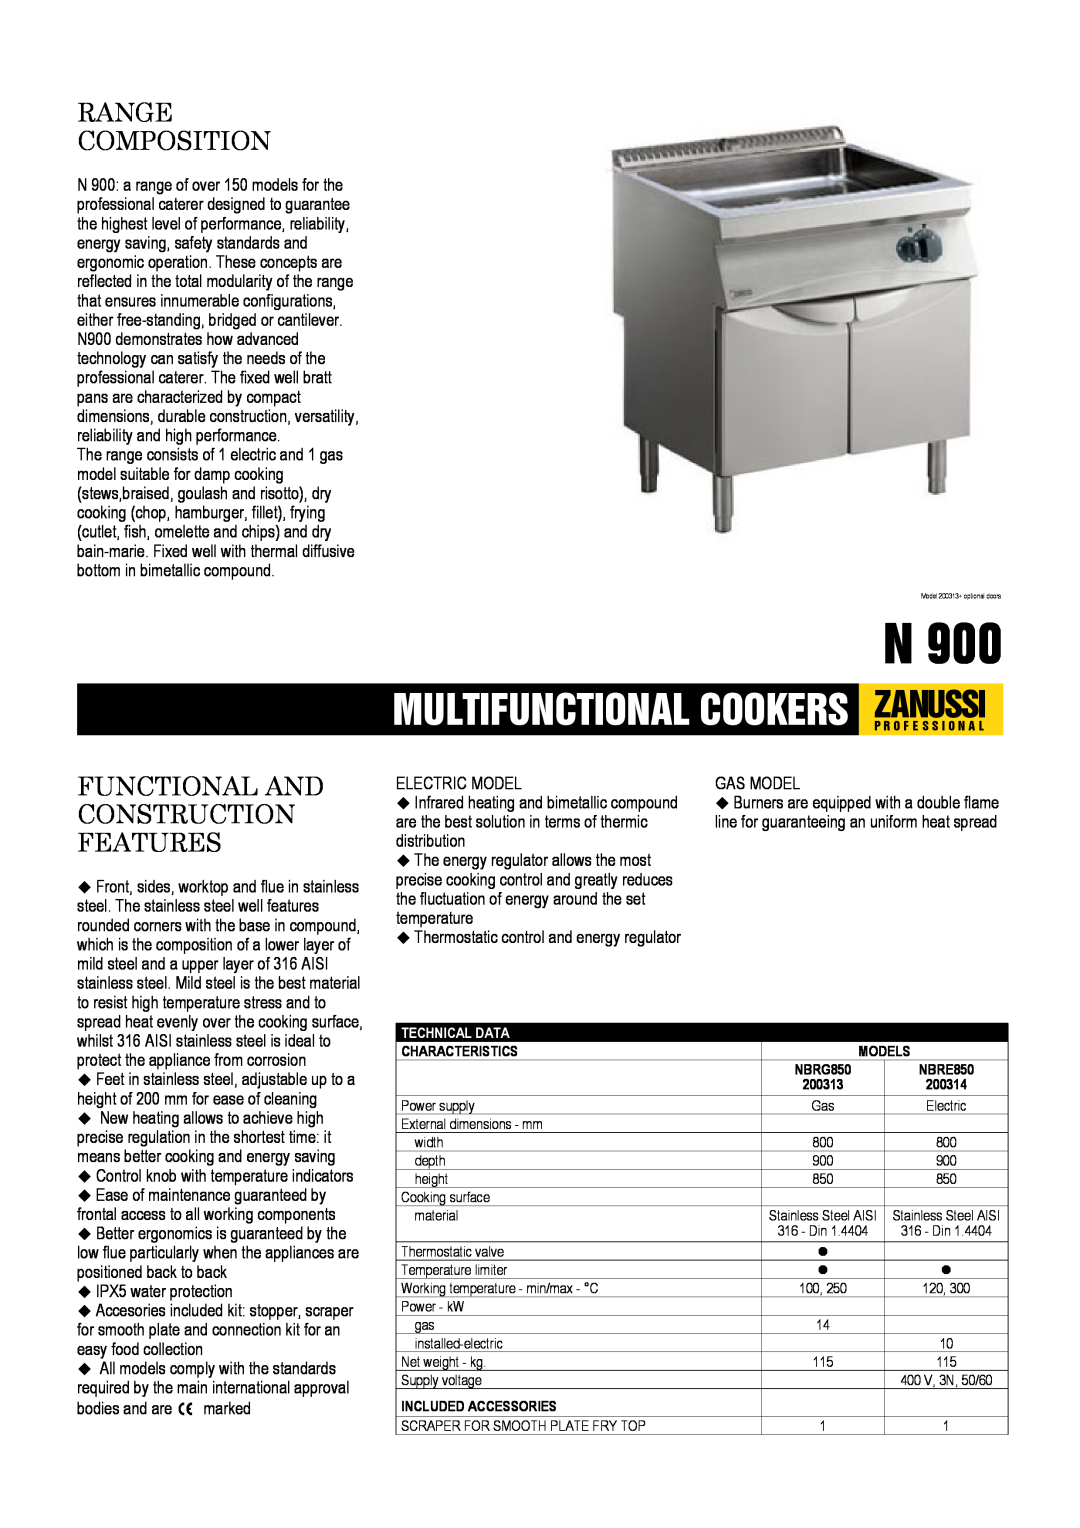 Zanussi NBRE850, NBRG850, 200314, 200313 dimensions Range Composition, Functional And Construction Features 